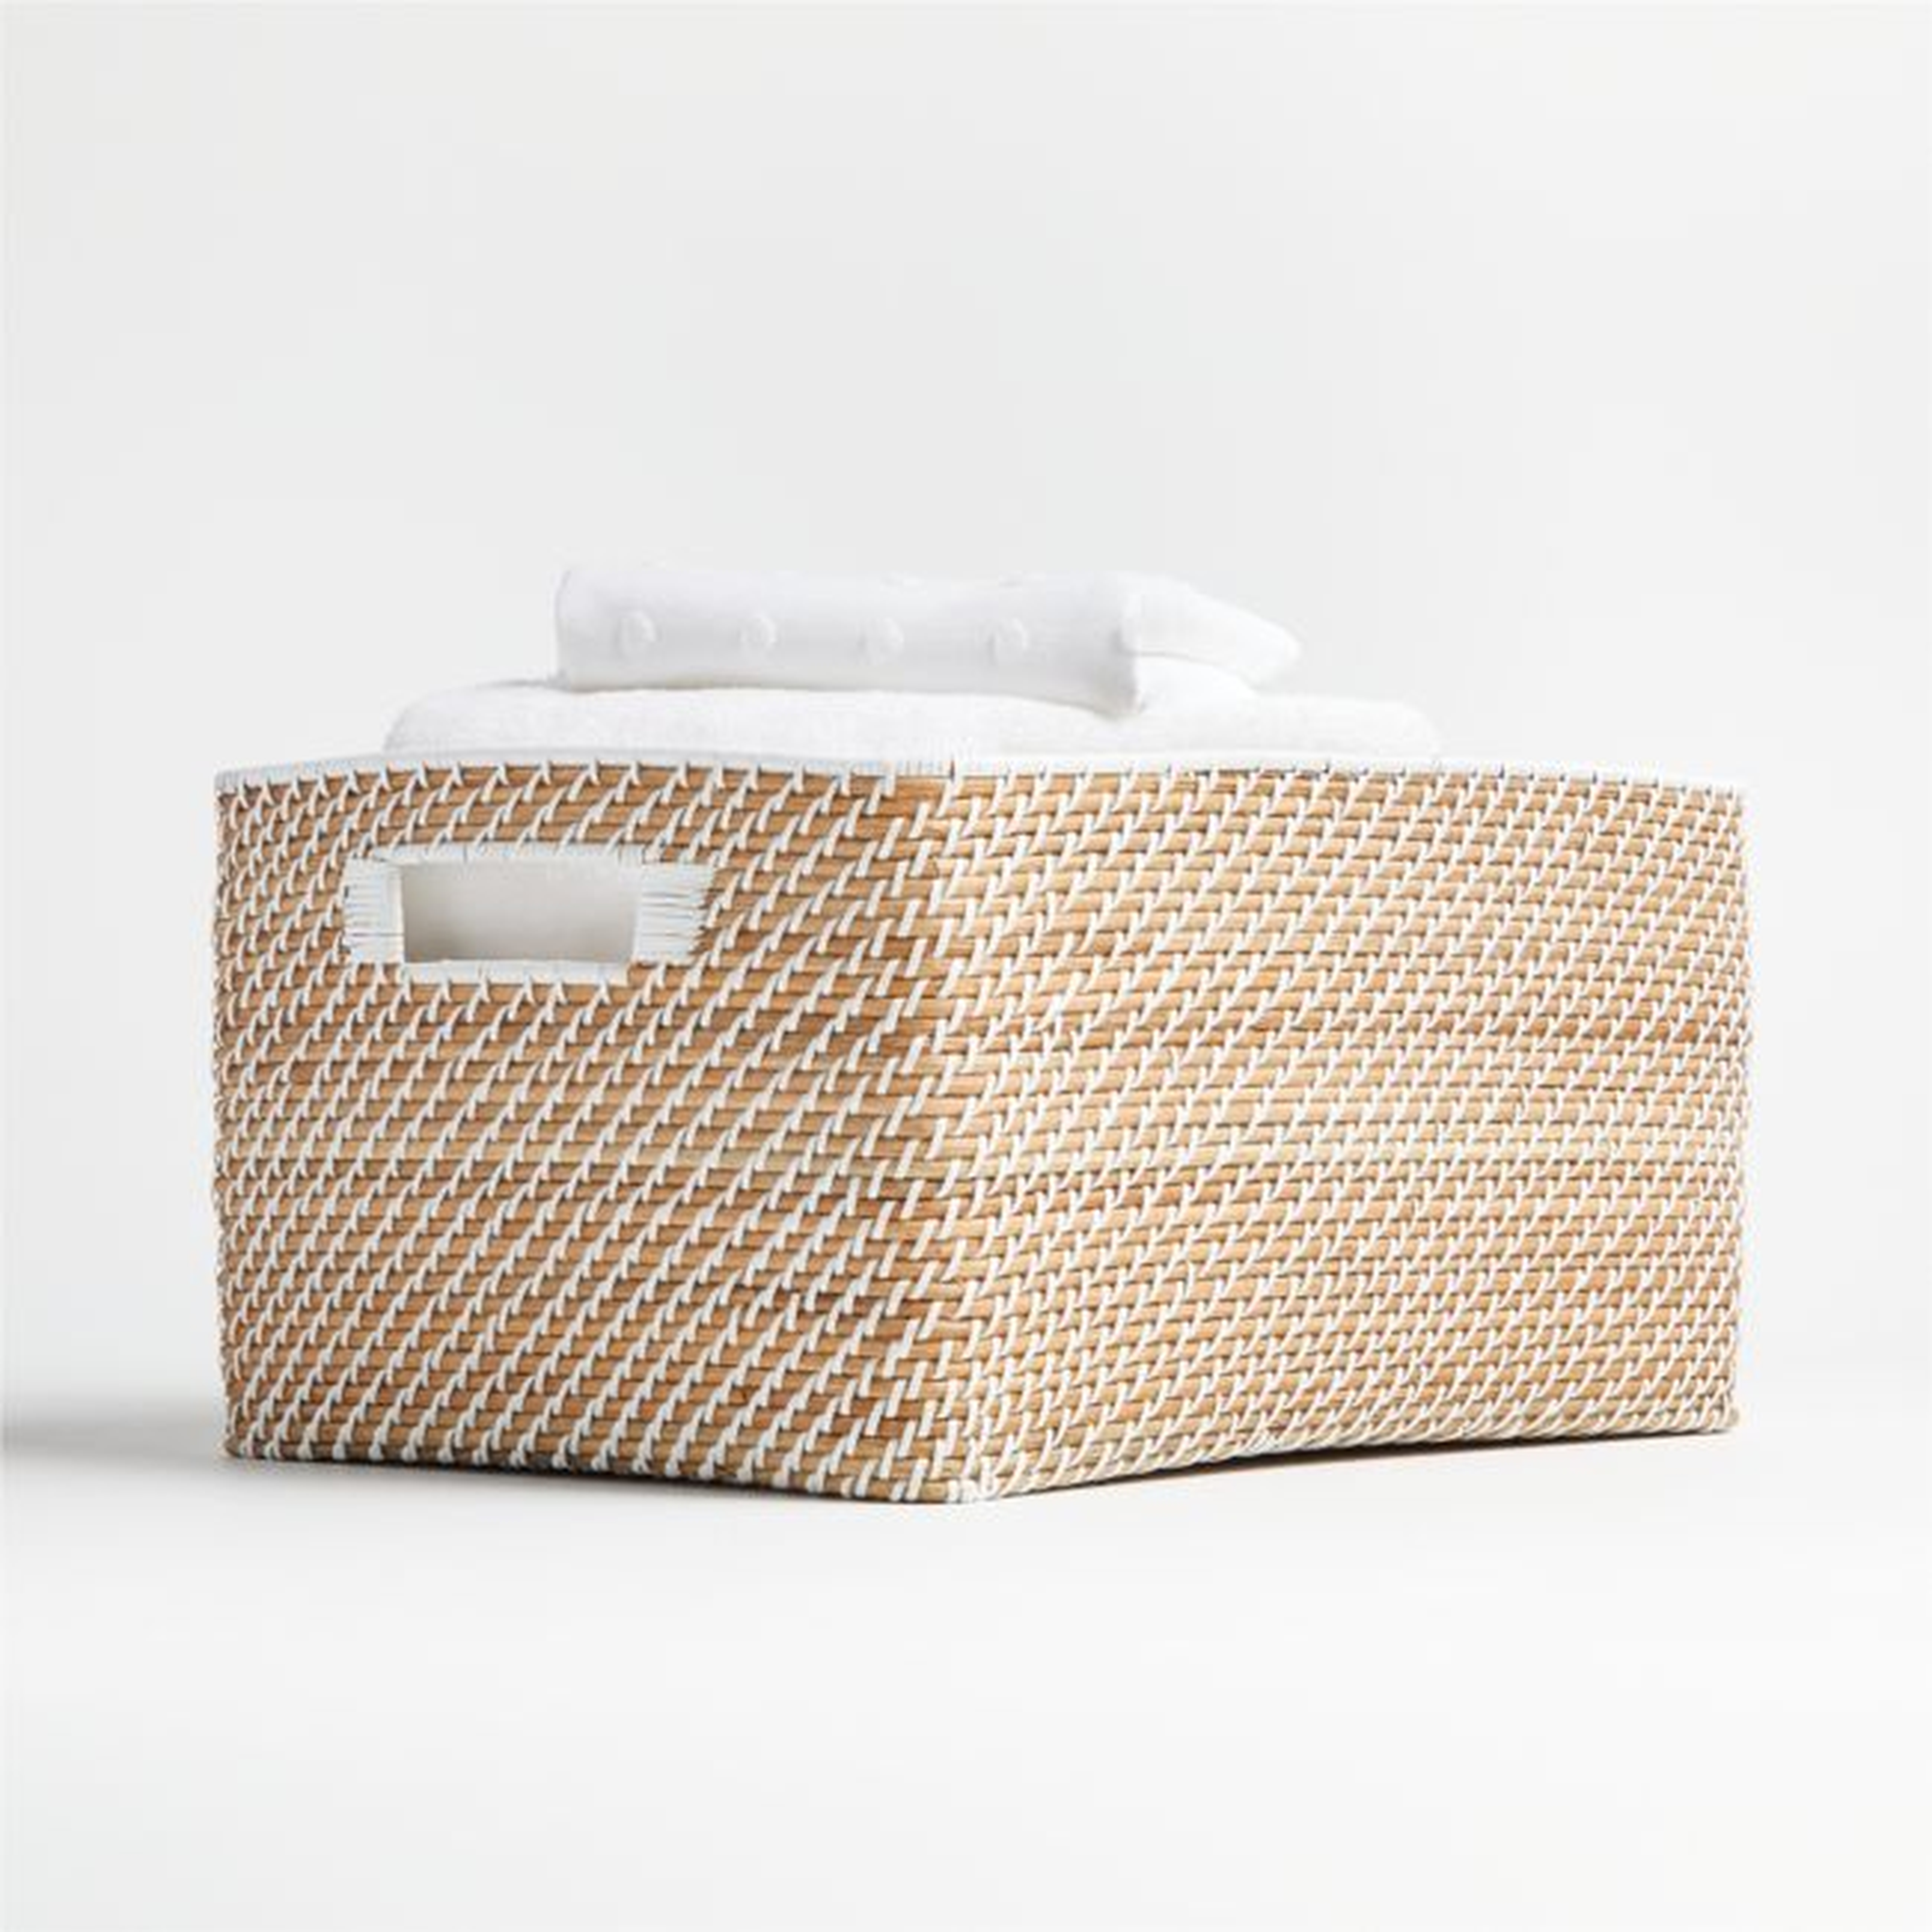 Sedona Large White Tote - Crate and Barrel